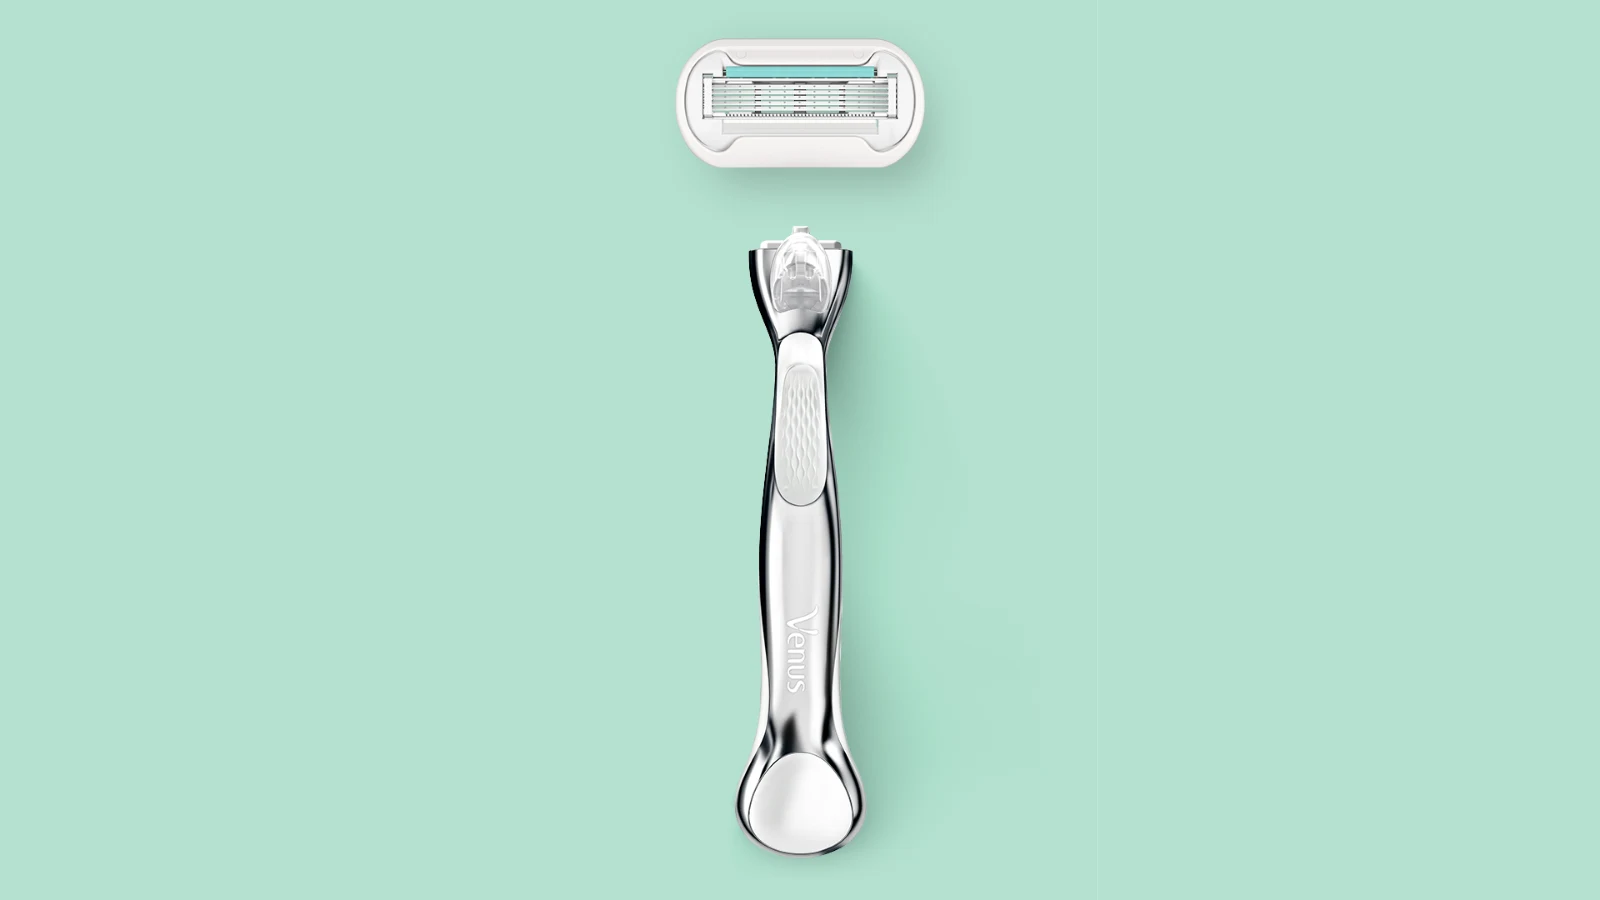 How to clean and look after your shaver